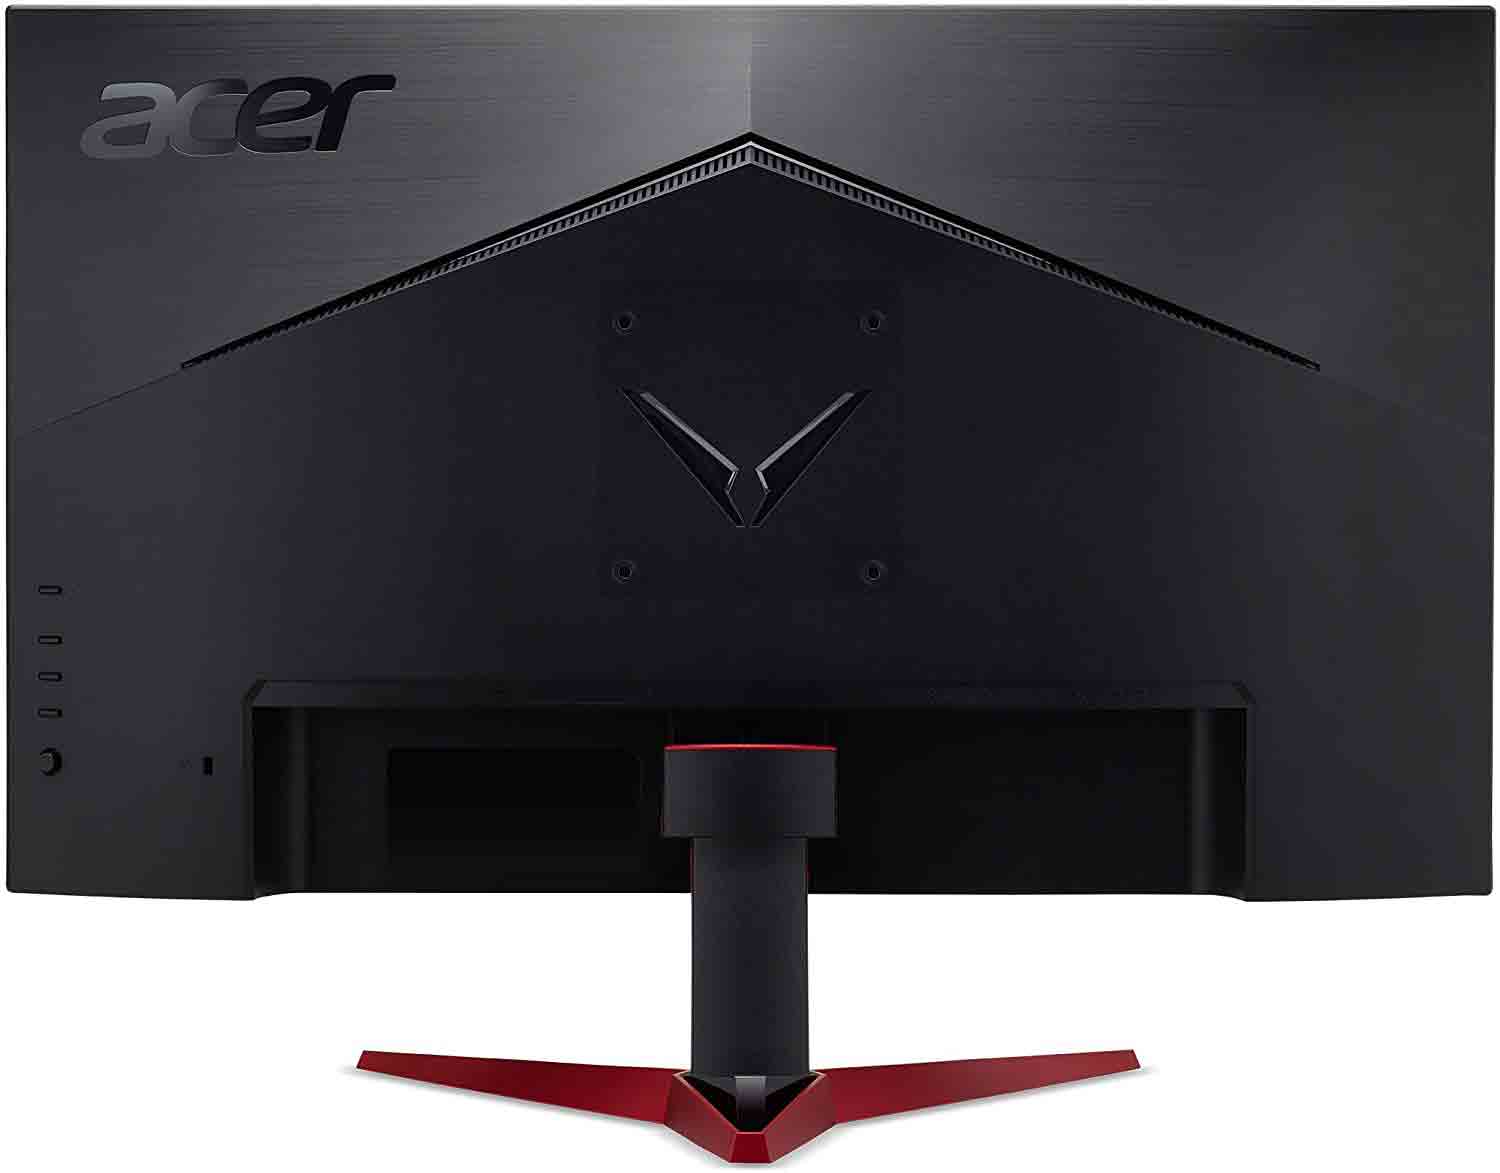 Acer unveils Nitro VG271 Zbmiipx 280 hz monitor for gaming